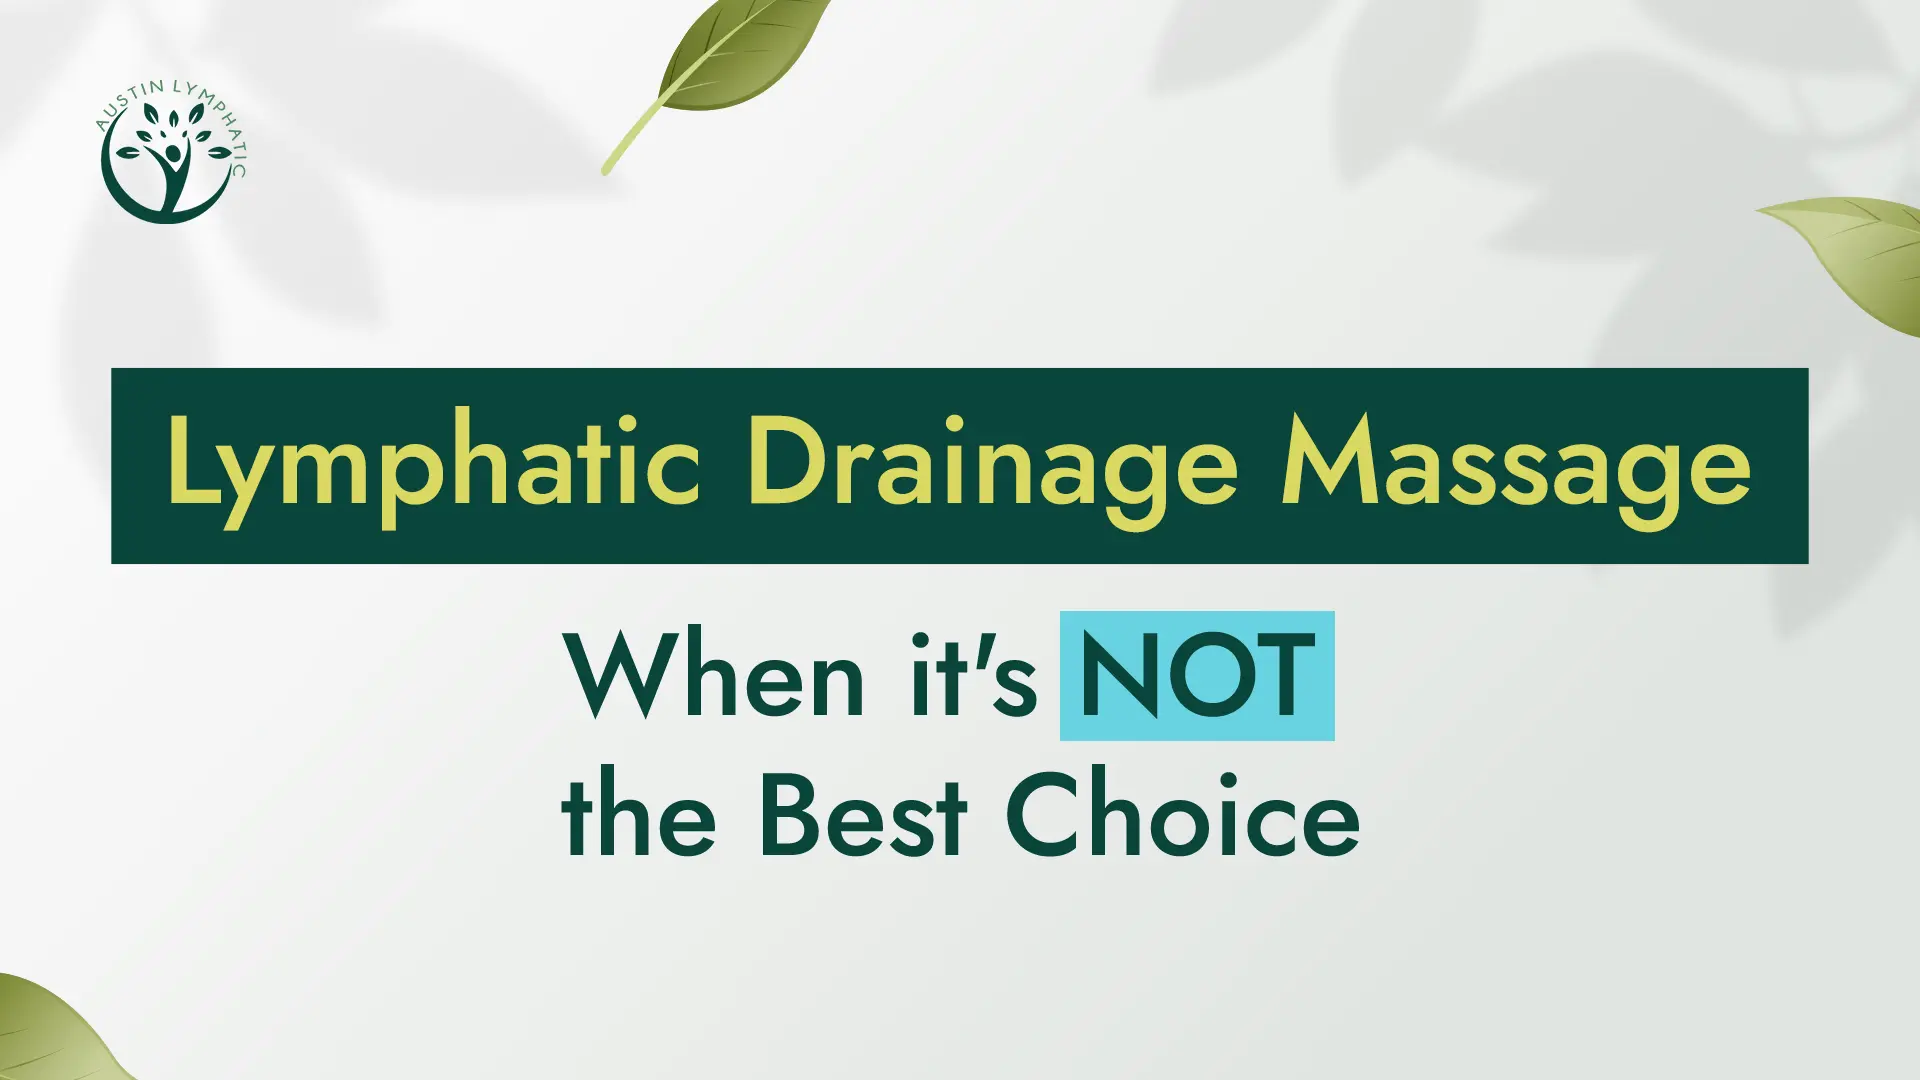 Lymphatic Drainage Massage: When it's not the best choice.